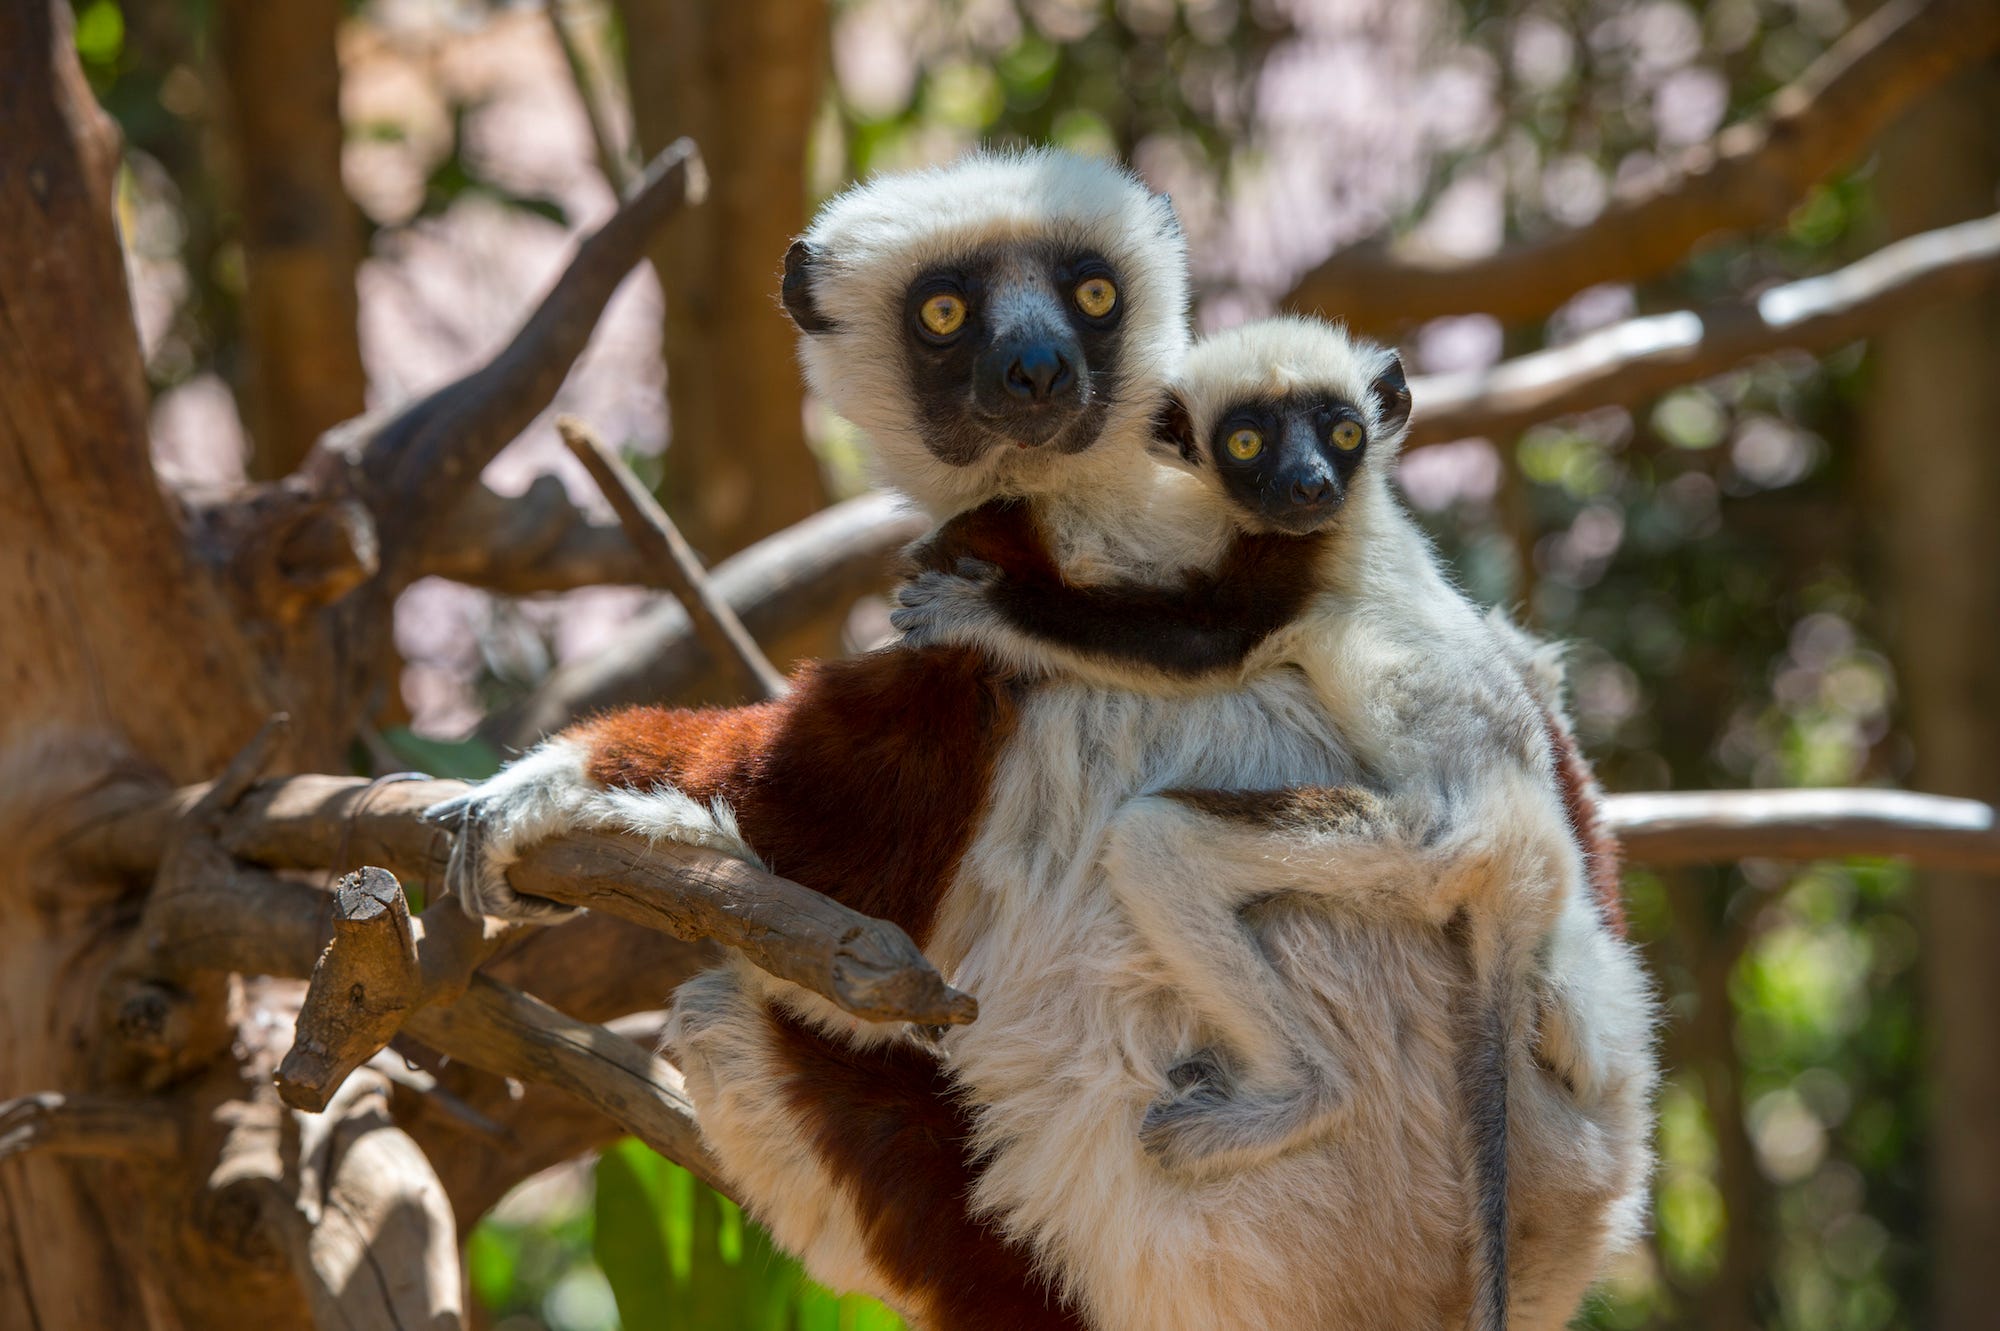 <p>Luesche said Madagascar is fantastic for wildlife spotting, making it an under-the-radar alternative to Costa Rica.</p><p>"In fact, it is home to a wealth of animals that you will not find anywhere else on Earth, including lemur species, chameleons, Tenrecs, fossas, and giant chameleons," Luescher said.</p><p>"In terms of accommodation, there is a wealth of ultra-luxury lodges and hotels," Luescher added.</p>